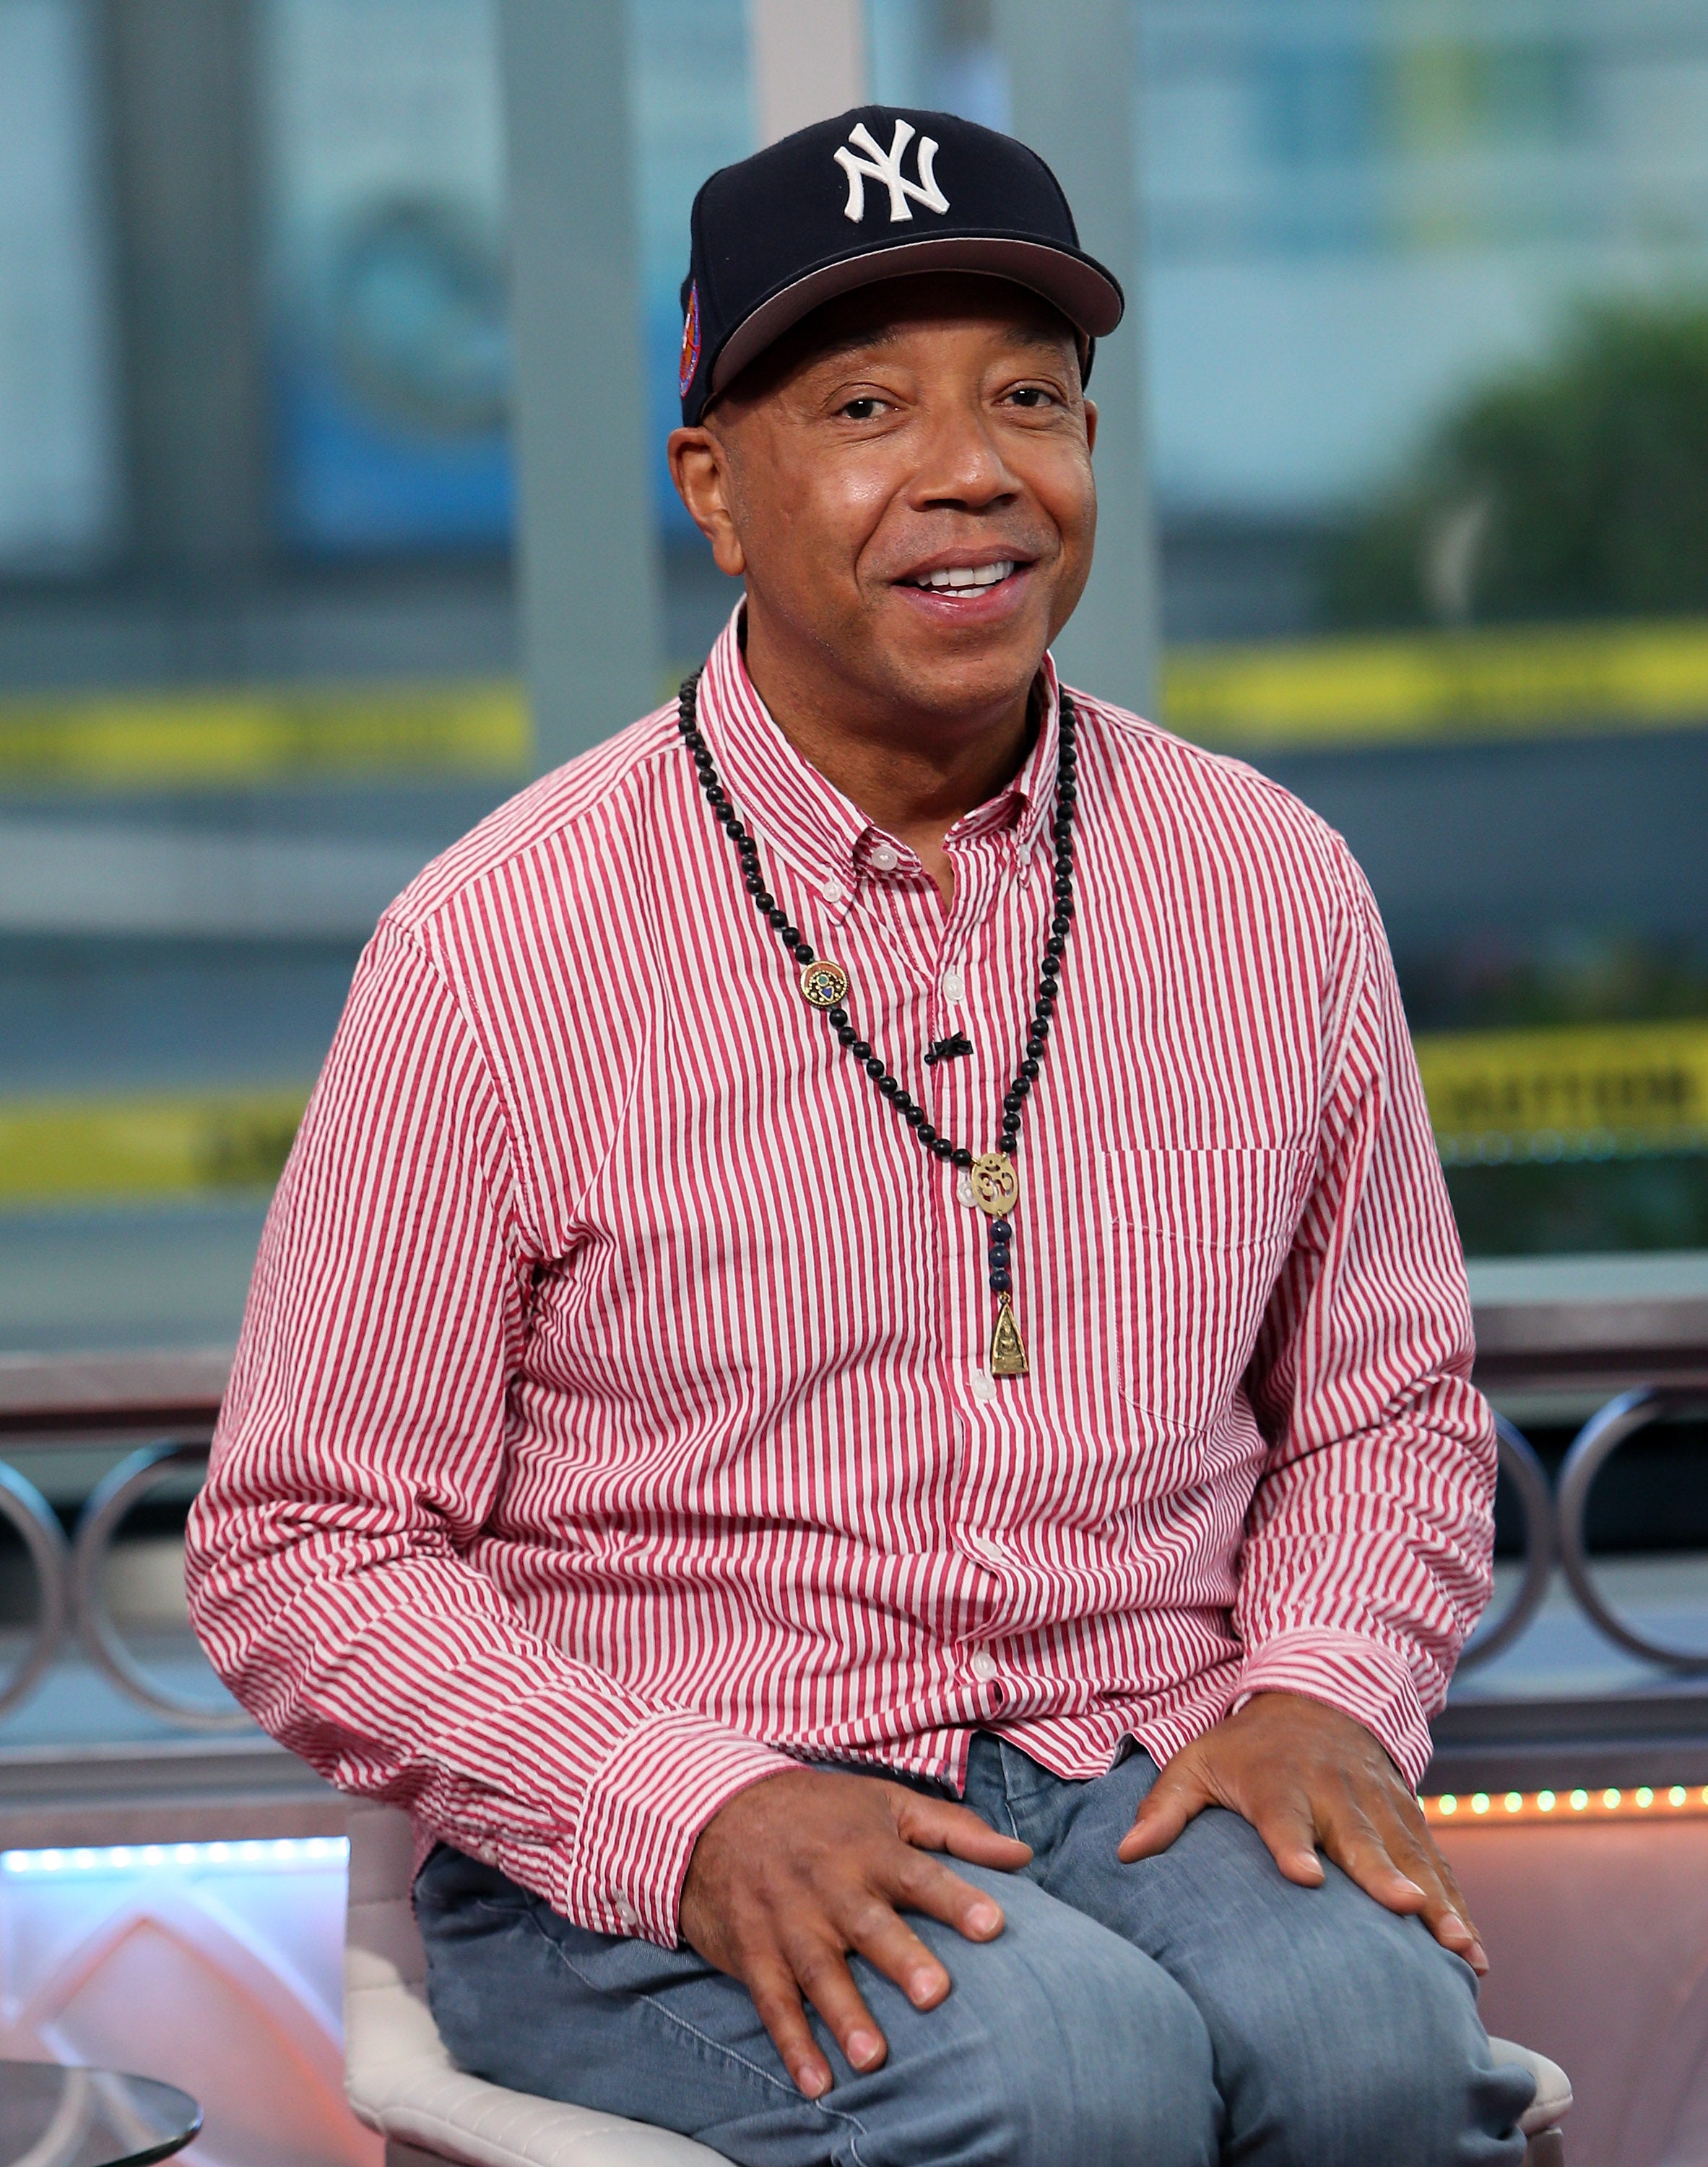 The Quick Read: Russell Simmons Is Defending Himself Against Rape Allegations With #NotMe
 
